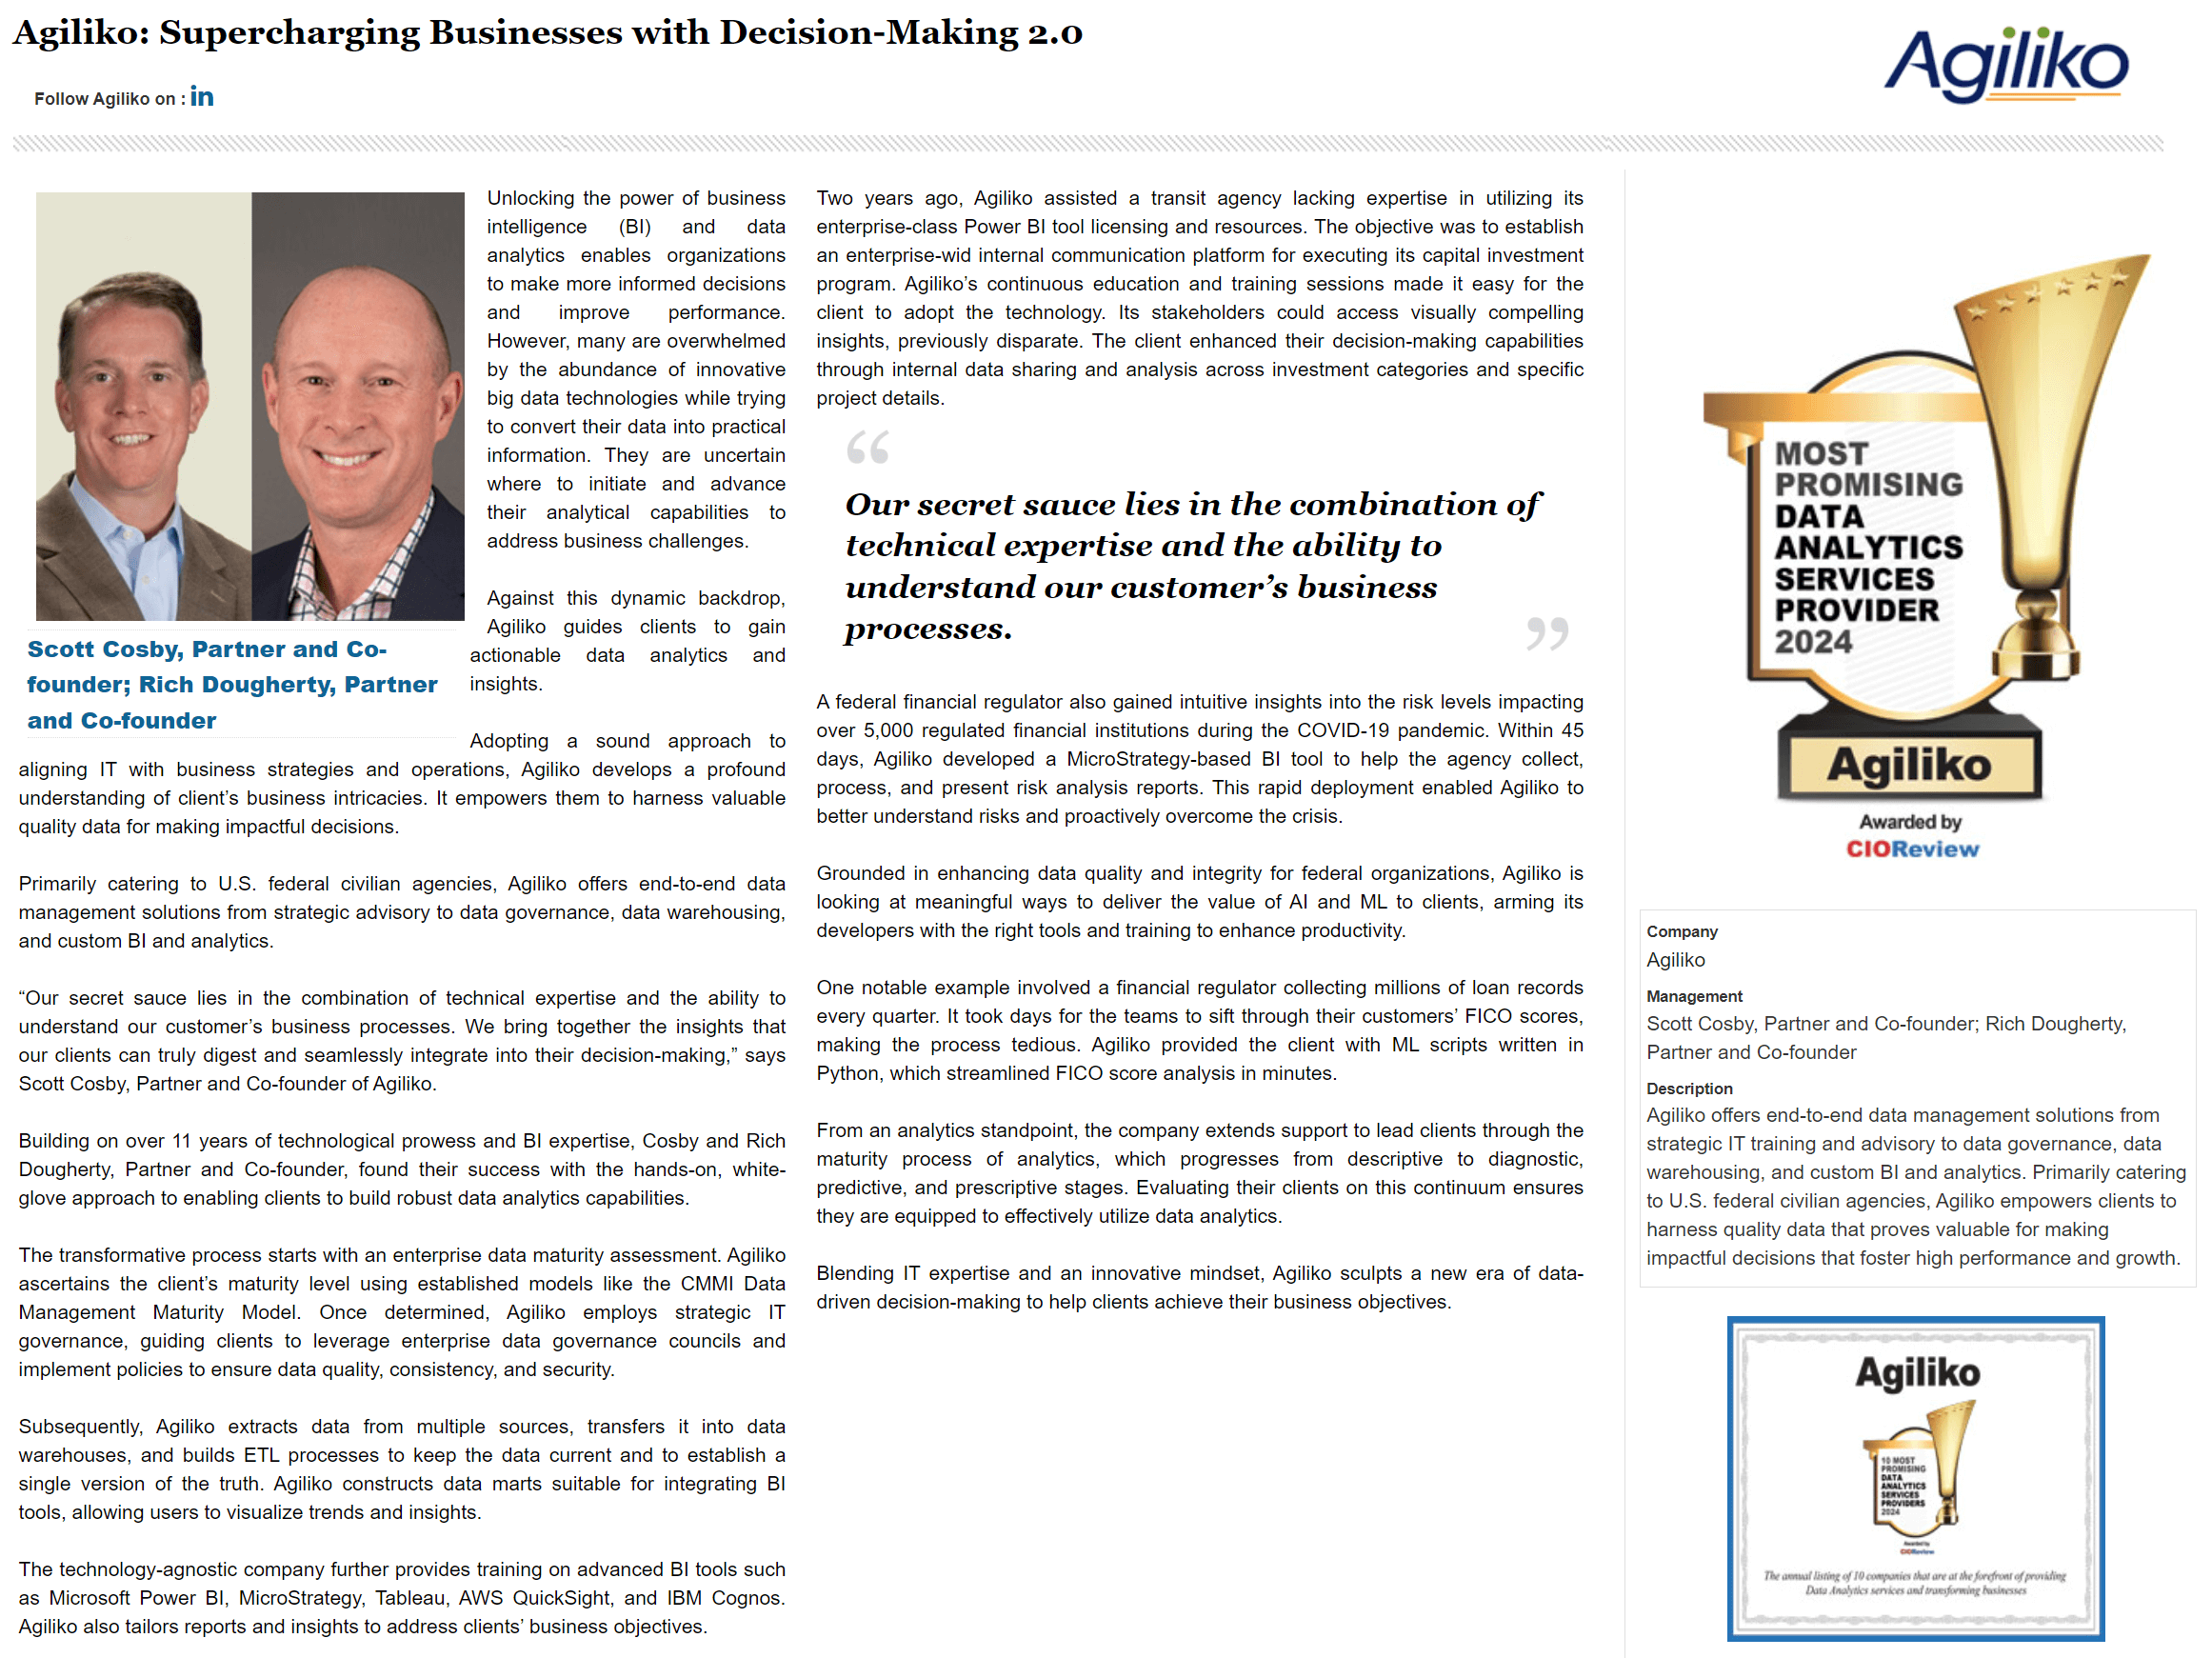 2024 CIO Review Article about Agiliko